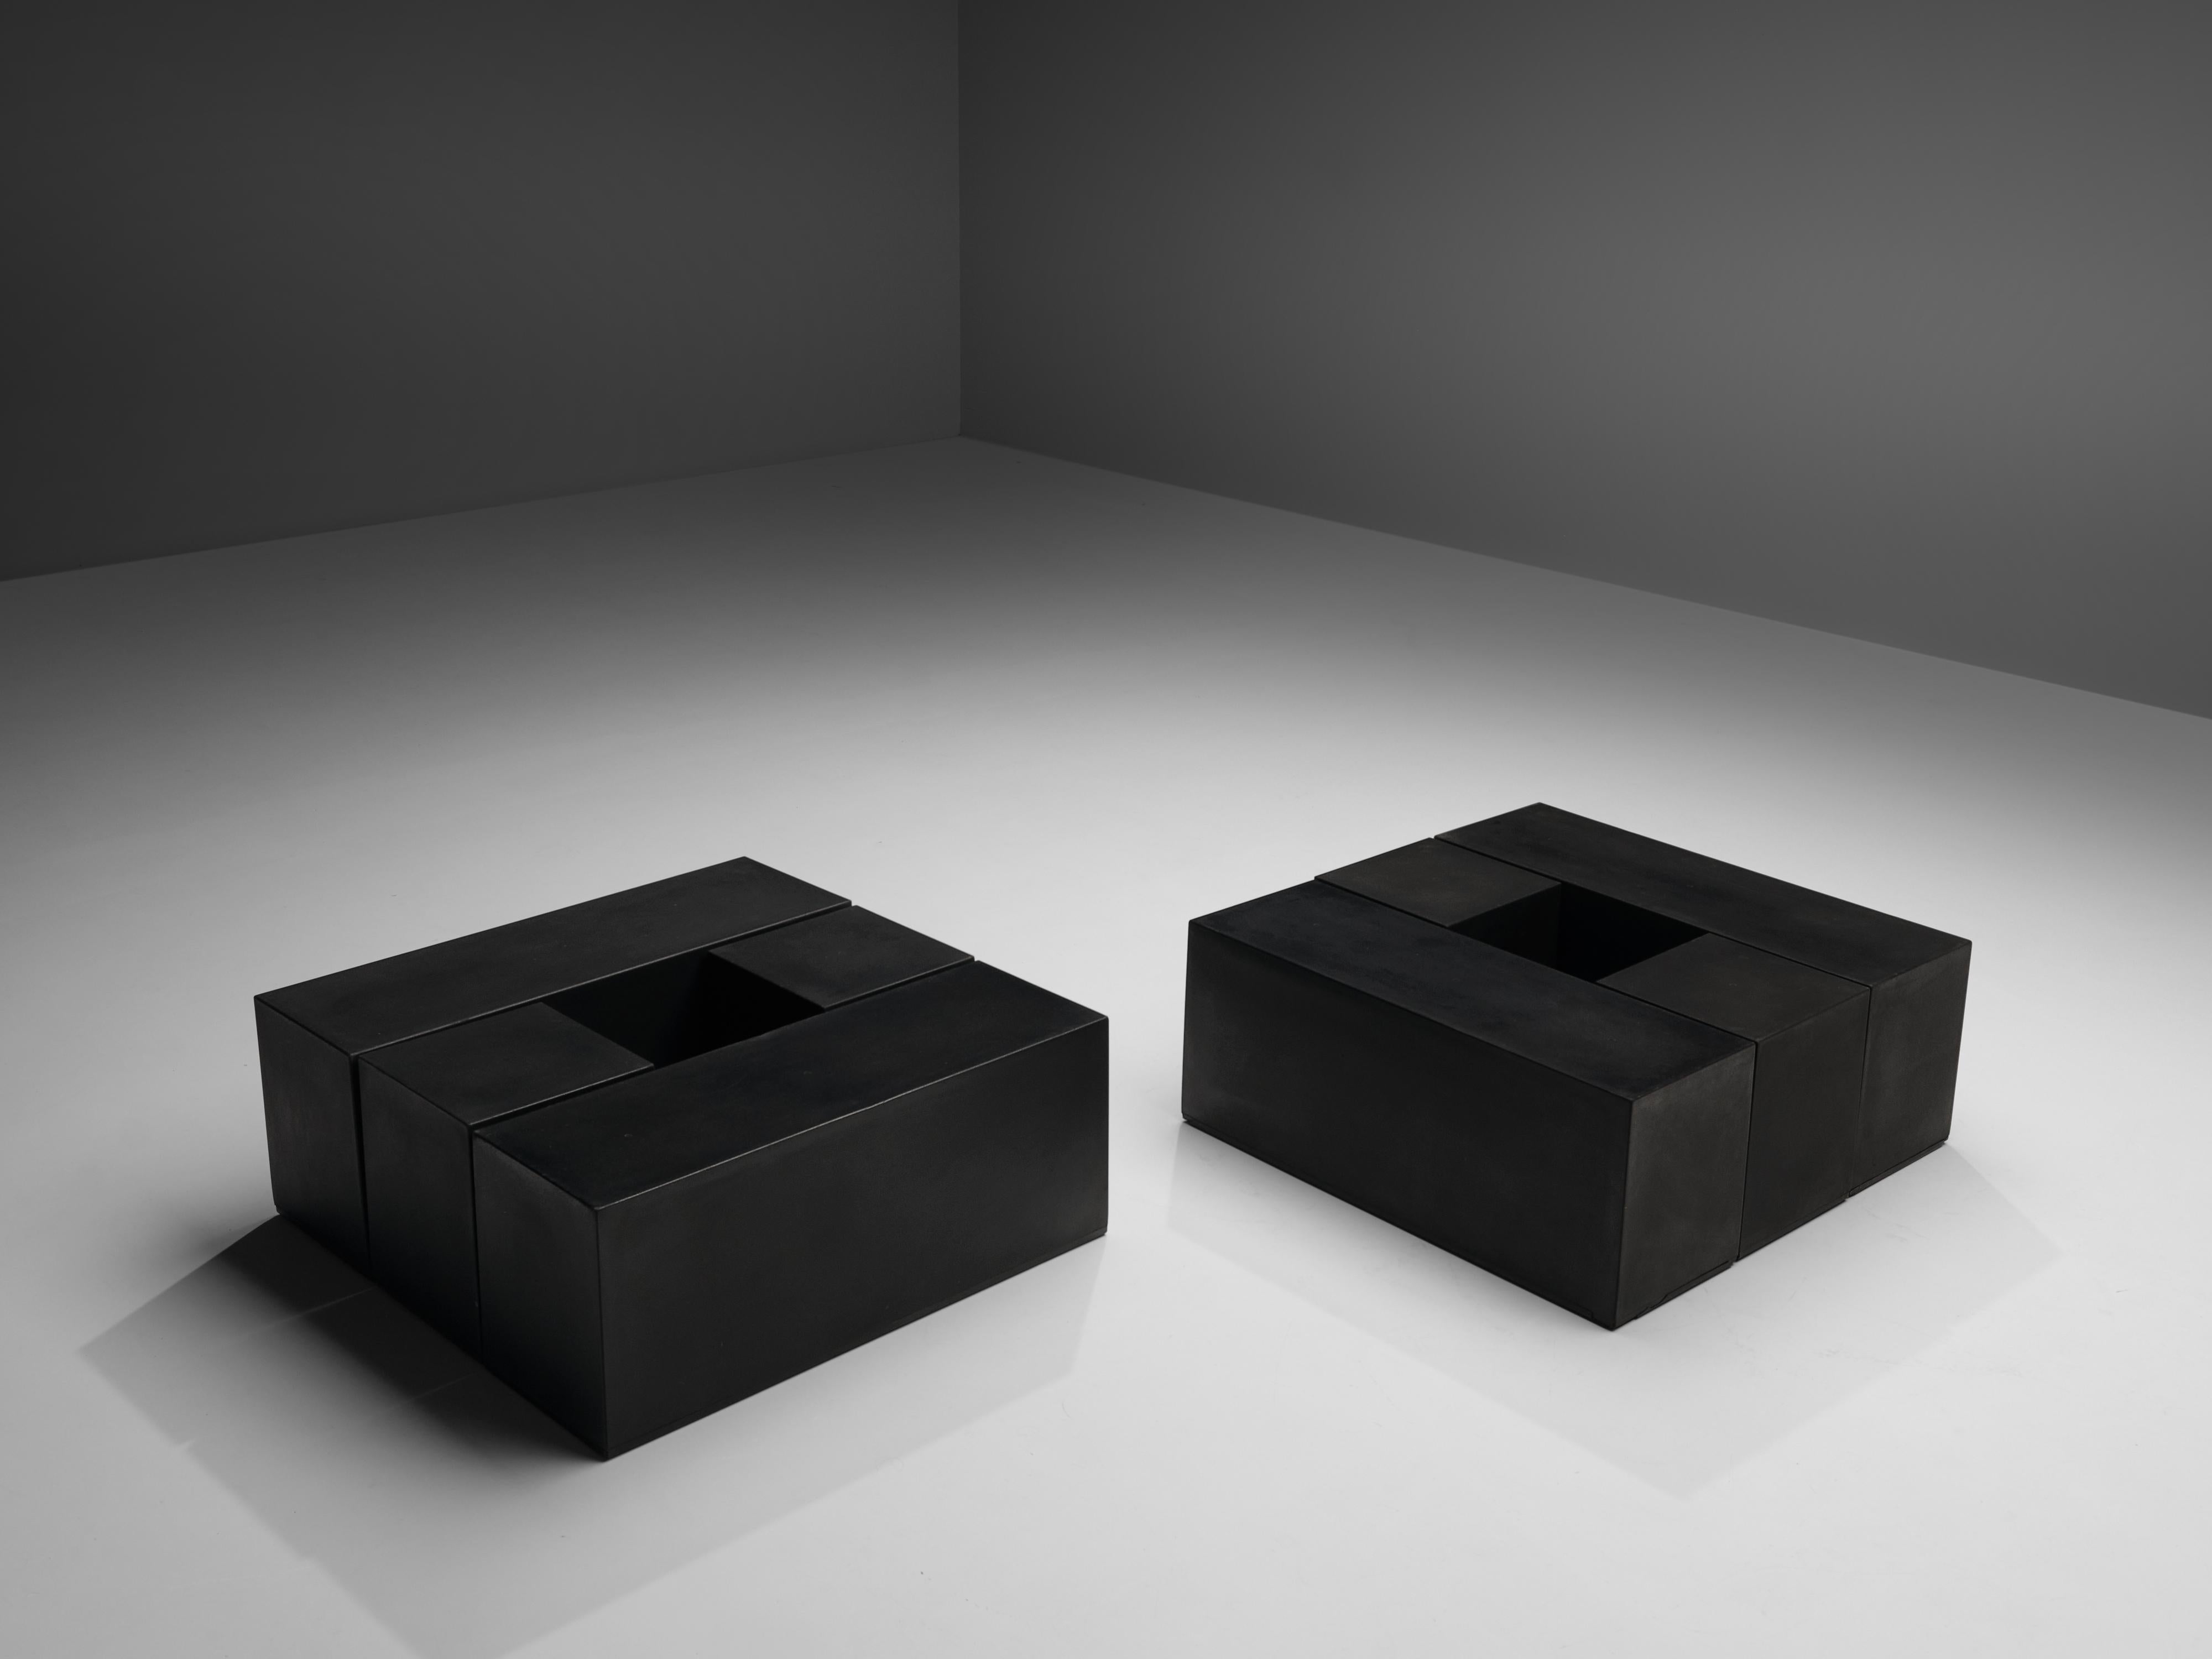 Mario Bellini for B&B Italia, side table elements 'Gli Scacchi', black polyurethane, Italy, 1971

Mario Bellini desiged the 'Gli Scacchi' meaning 'the chess' in 1971. Self-skinning polyurethane was used as a material which is long lasting and easy